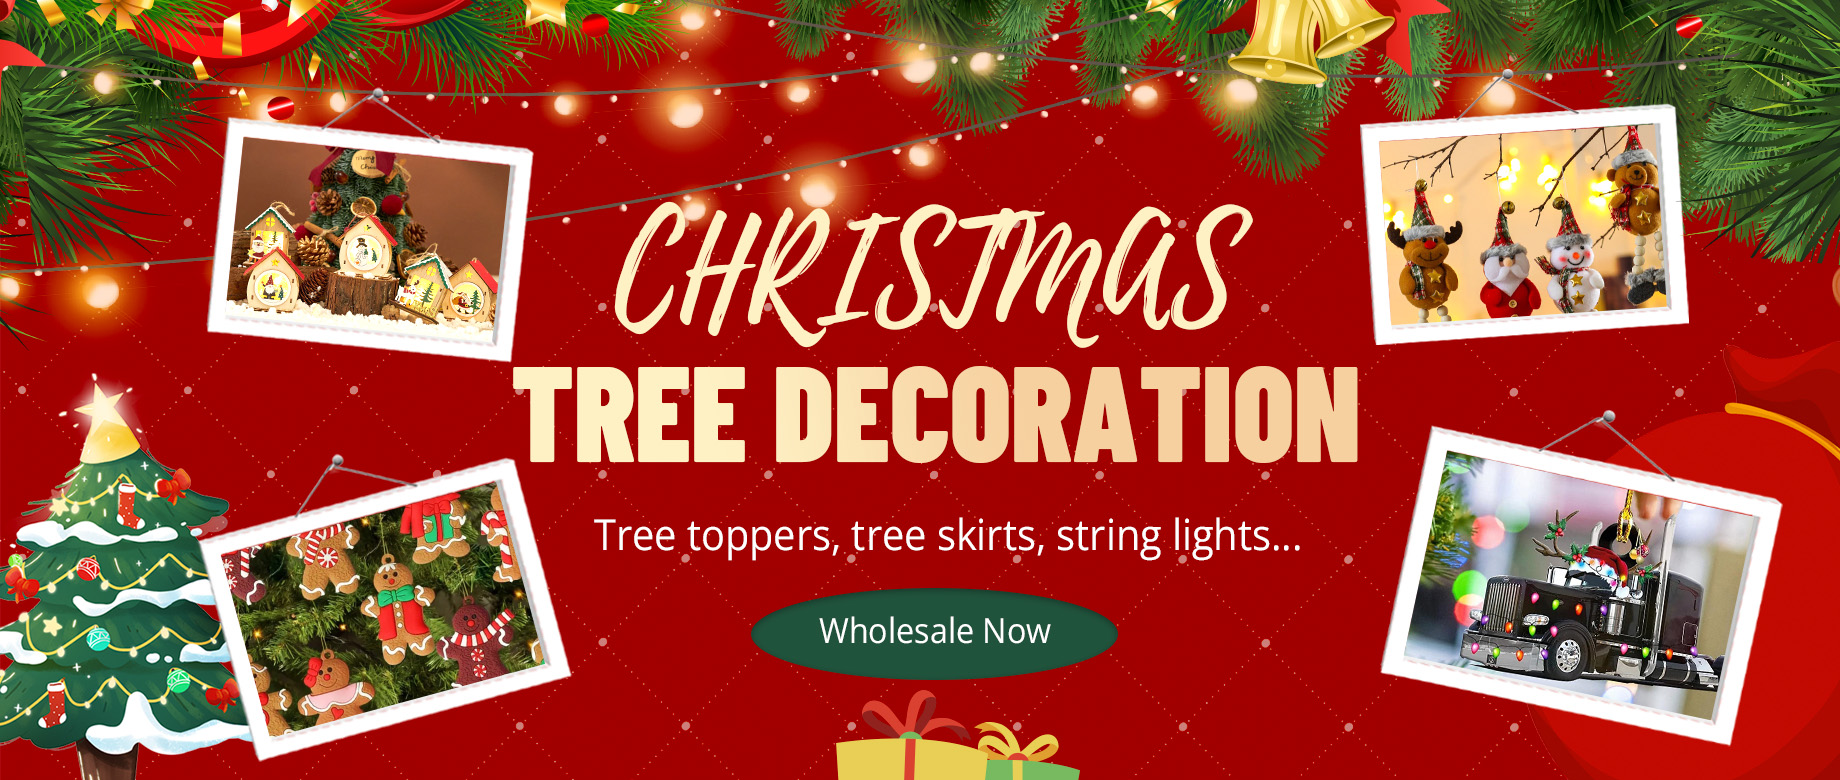 HOW CAN YOU MAKE YOUR CHRISTMAS TREE LOOK GOOD FOR LESS?